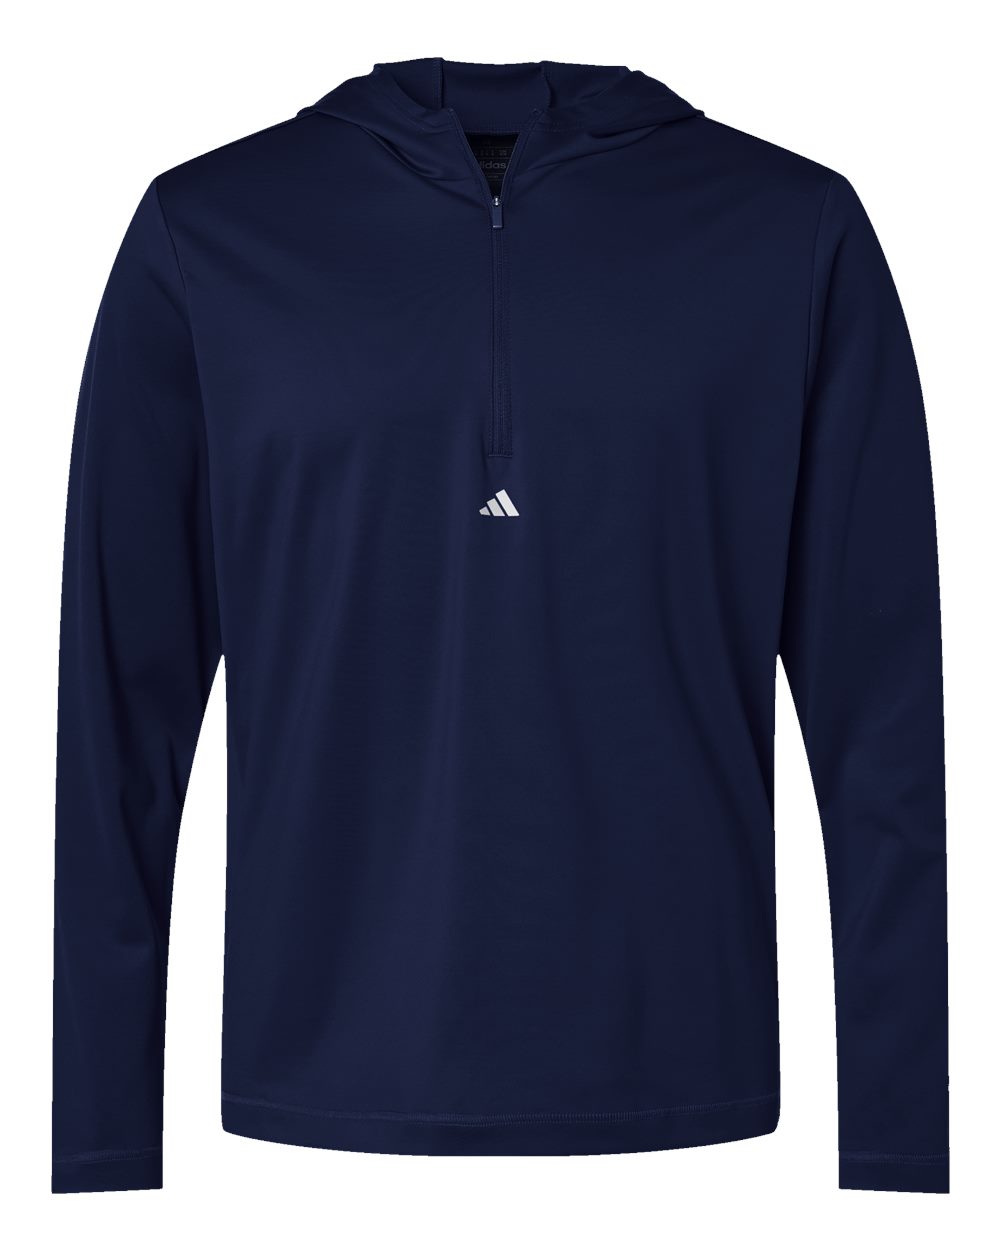 Adidas A596 Lightweight Performance Quarter-Zip Hooded Pullover #color_Collegiate Navy